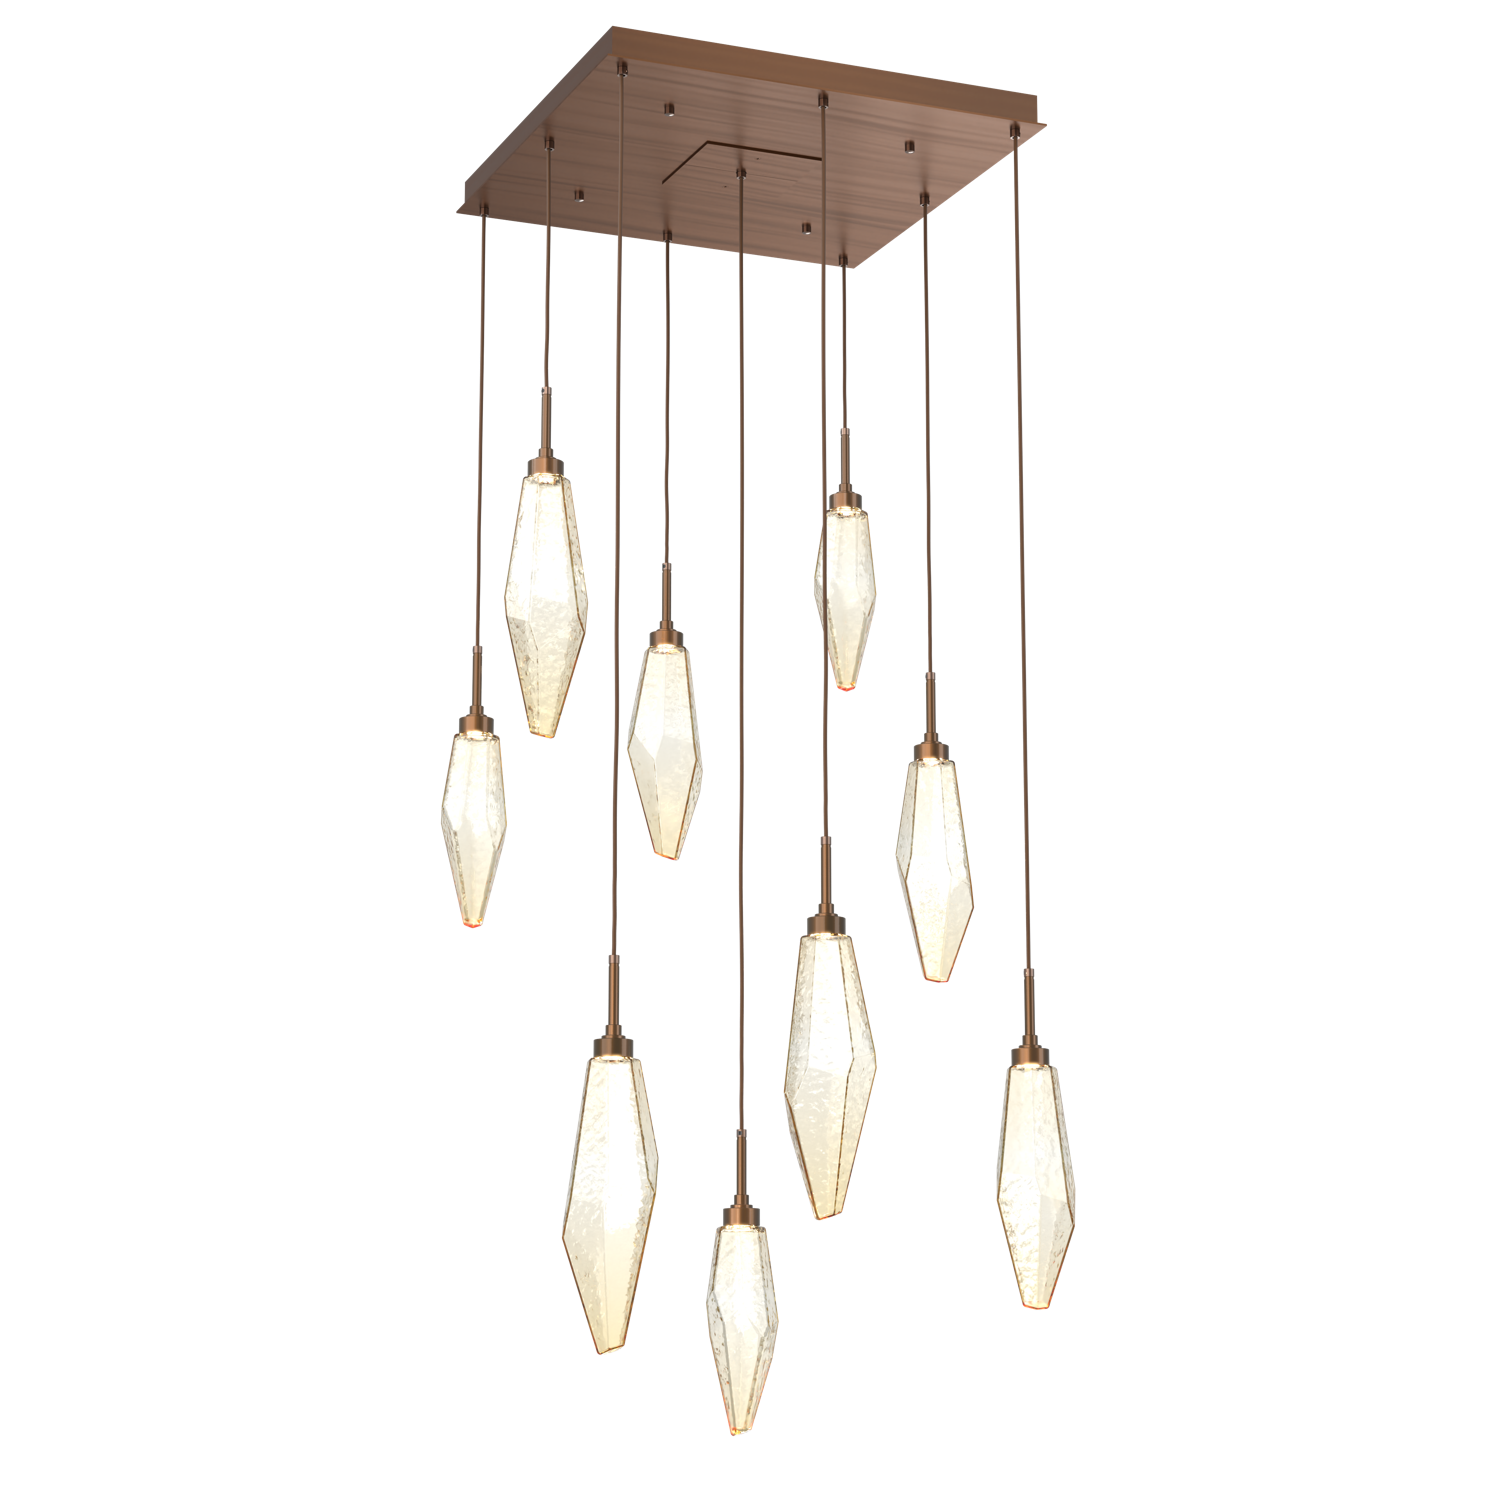 CHB0050-09-RB-CA-Hammerton-Studio-Rock-Crystal-9-light-square-pendant-chandelier-with-oil-rubbed-bronze-finish-and-chilled-amber-blown-glass-shades-and-LED-lamping